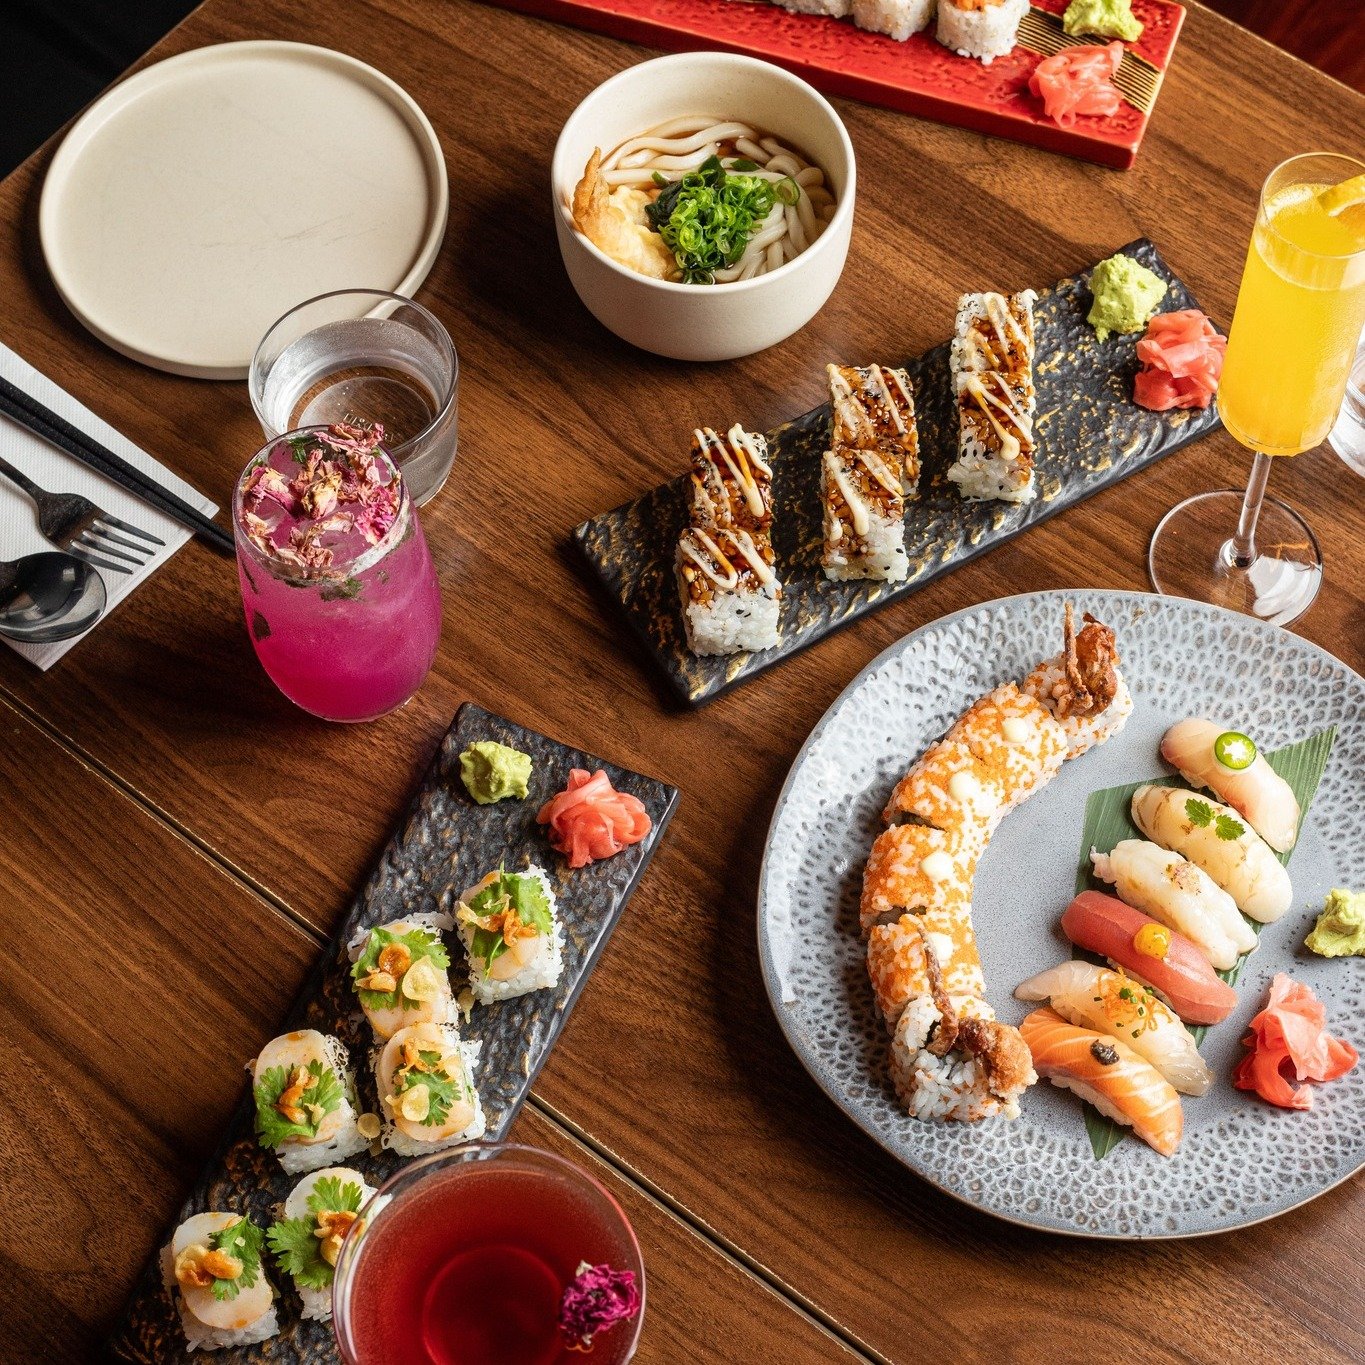 Sushi Saturday anyone?

Book a table for you and your friends now, its time for sushi and cocktails!

Booking link in the bio.

#ChopChop #Canberra #Restaurant